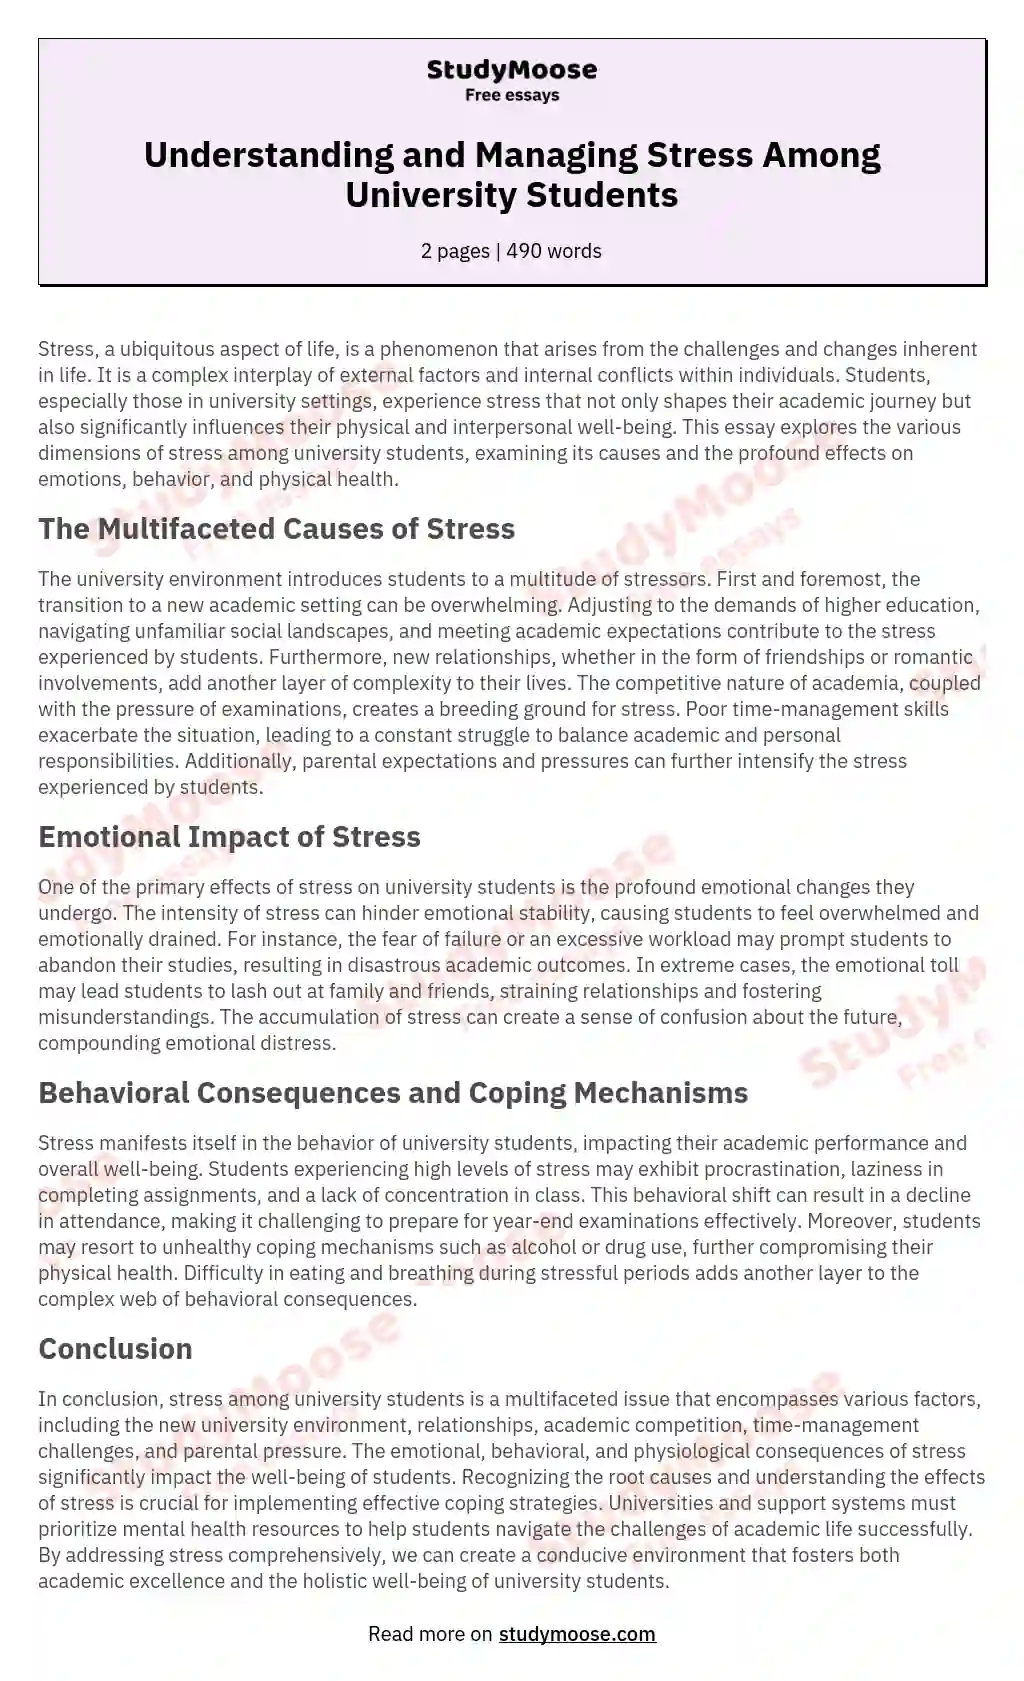 Understanding and Managing Stress Among University Students essay